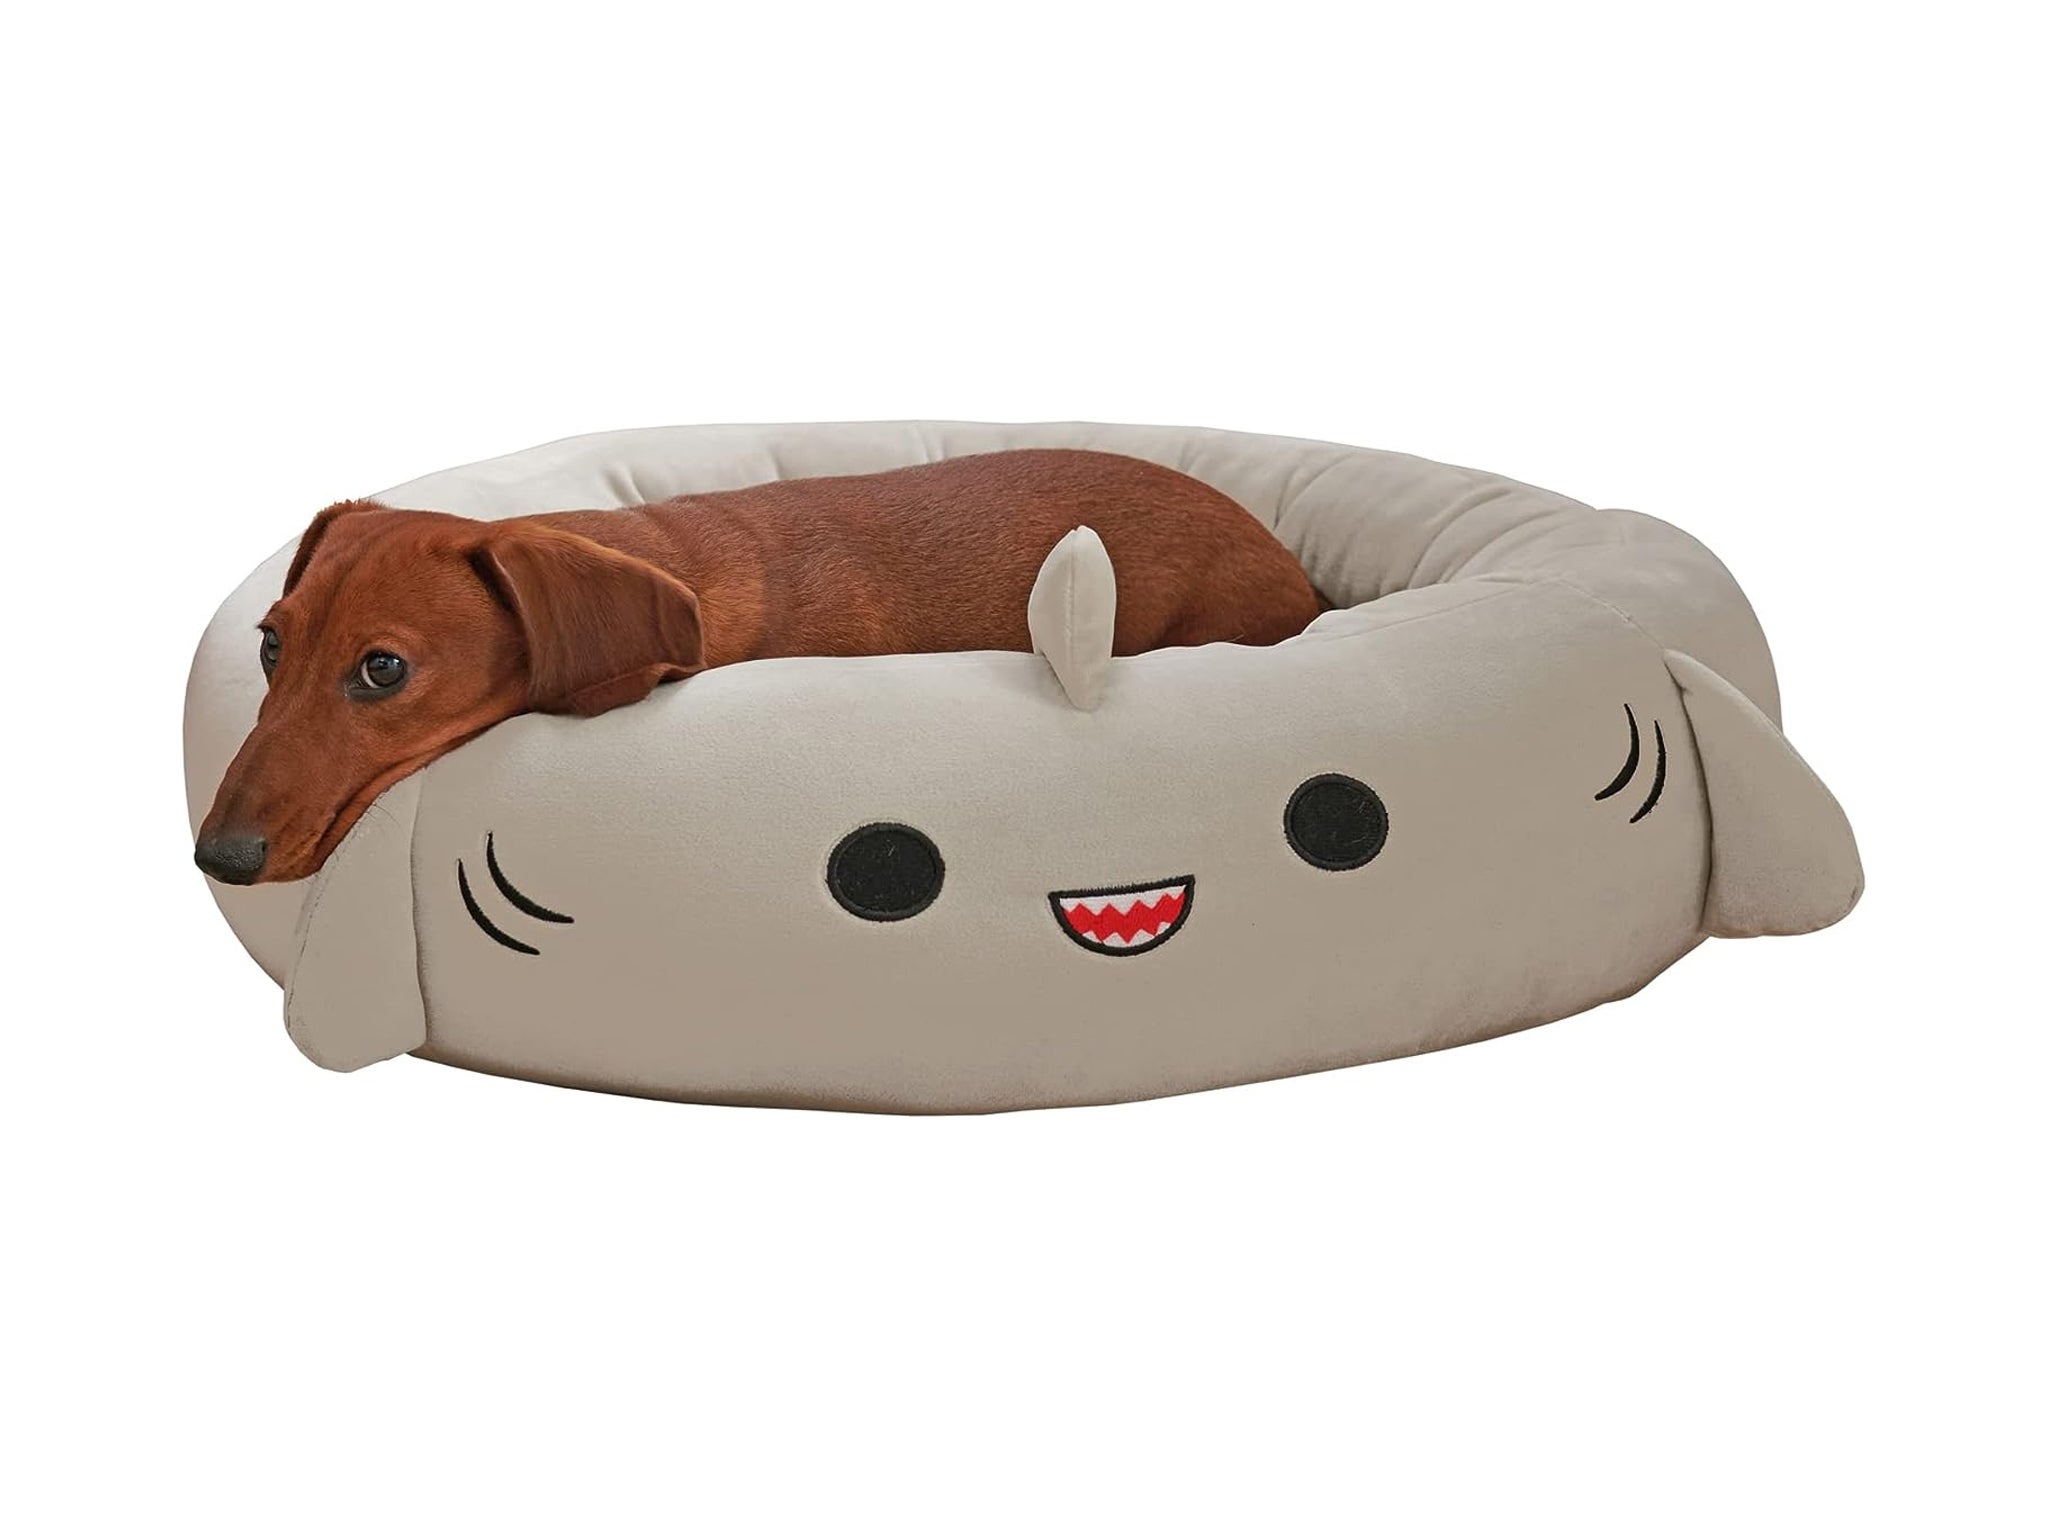 Squishmallows has launched pet beds on